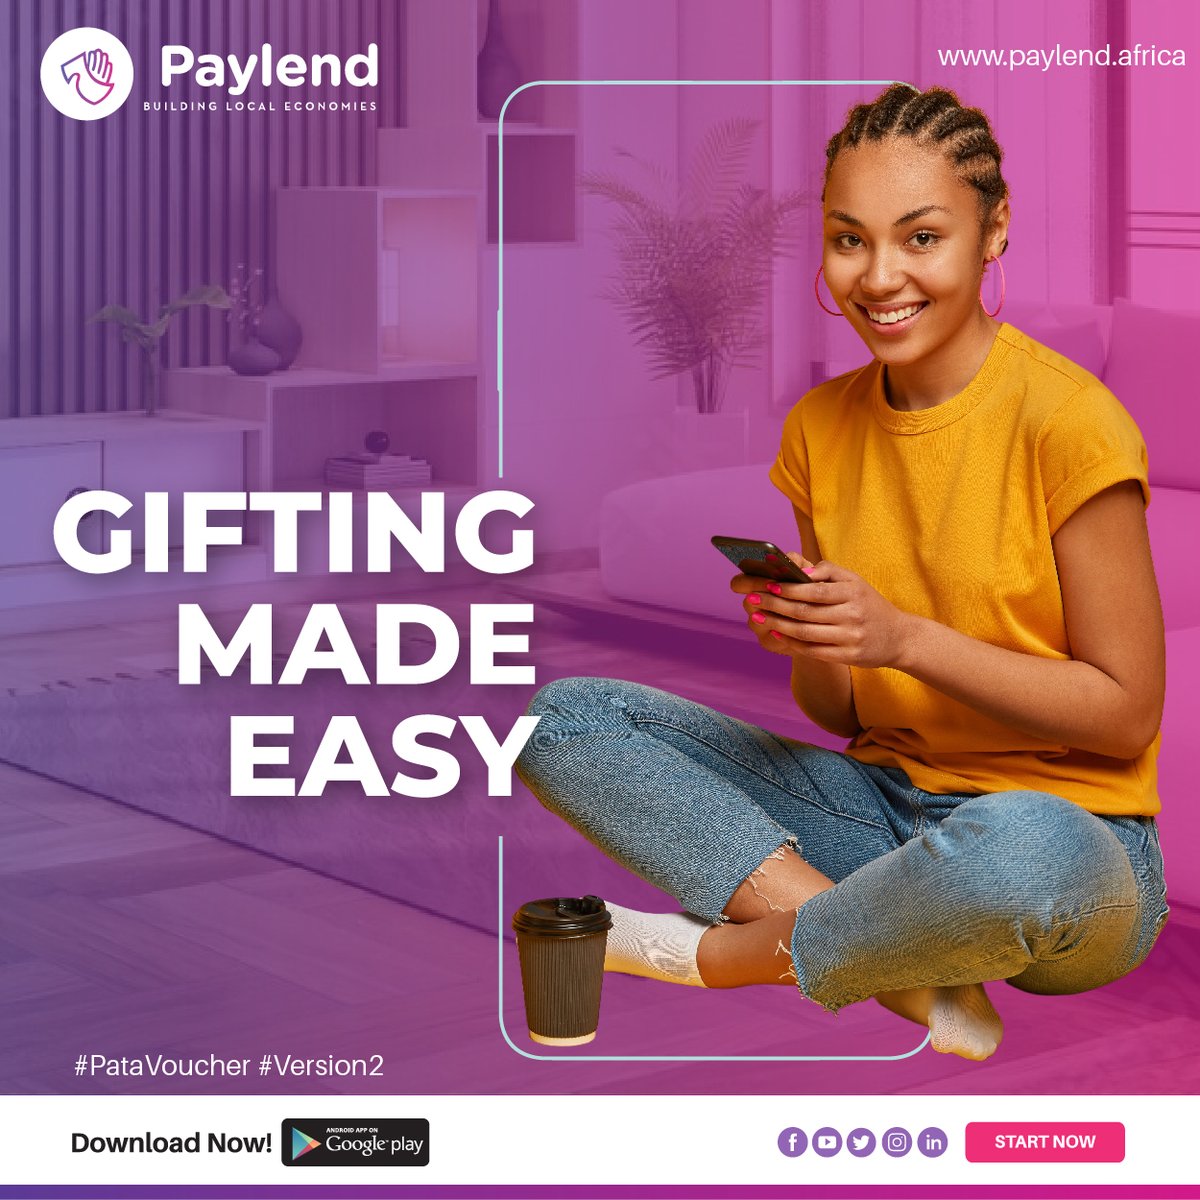 As we prepare for the festive season, the spirit of sharing and giving is awakened. Equip yourself and your loved ones with the right tools by signing up for Paylend Pata Voucher #GiftingMadeEasy #BuidingLocalEconomies zcu.io/u2cy or zcu.io/Nv7g